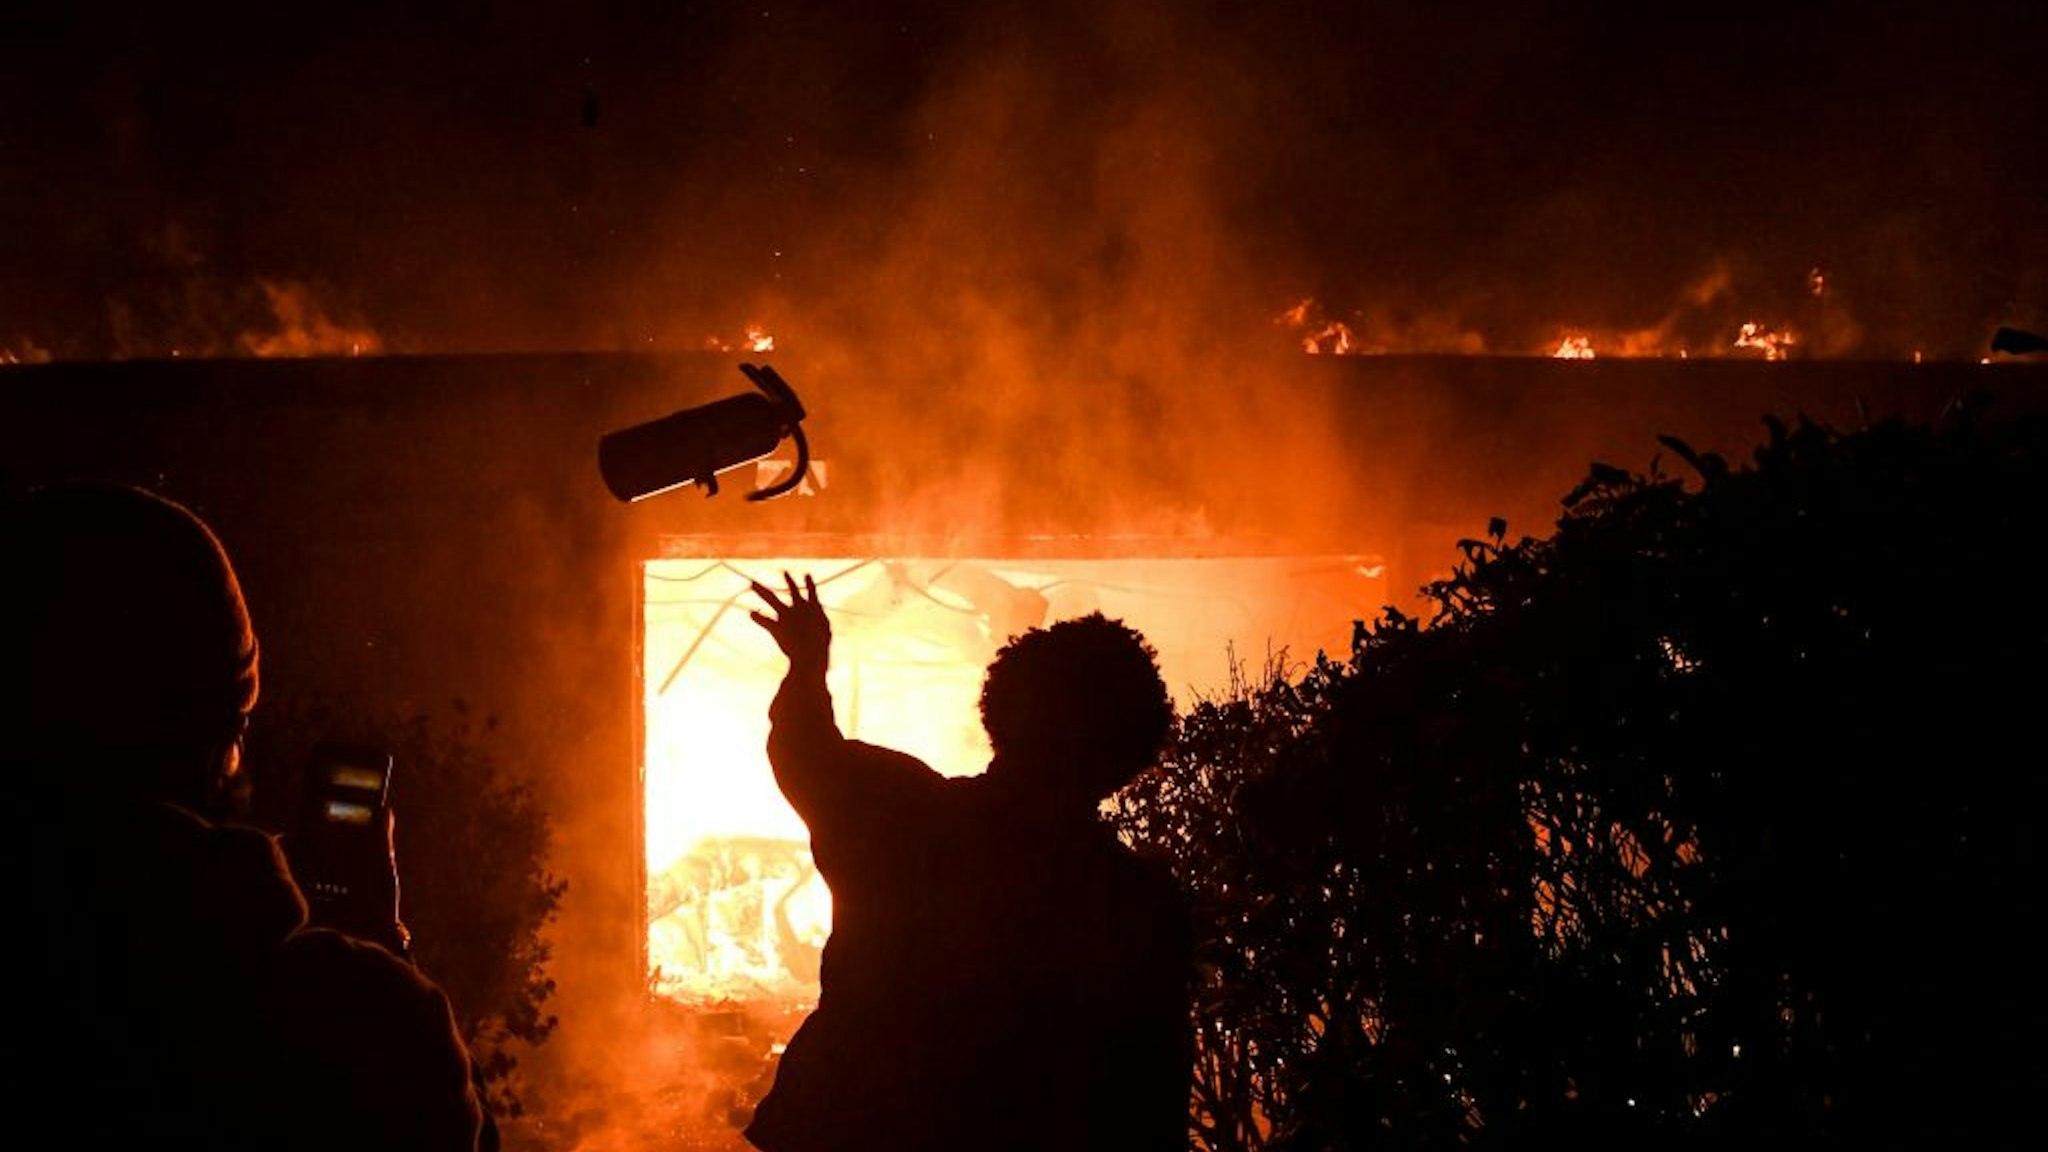 OPSHOT - A protester throws a fire extinguisher in a burning building during a demonstration in Minneapolis, Minnesota, on May 29, 2020, over the death of George Floyd, a black man who died after a white policeman kneeled on his neck for several minutes. - Violent protests erupted across the United States late on May 29 over the death of a handcuffed black man in police custody, with murder charges laid against the arresting Minneapolis officer failing to quell seething anger. (Photo by Chandan KHANNA / AFP) (Photo by CHANDAN KHANNA/AFP via Getty Images)